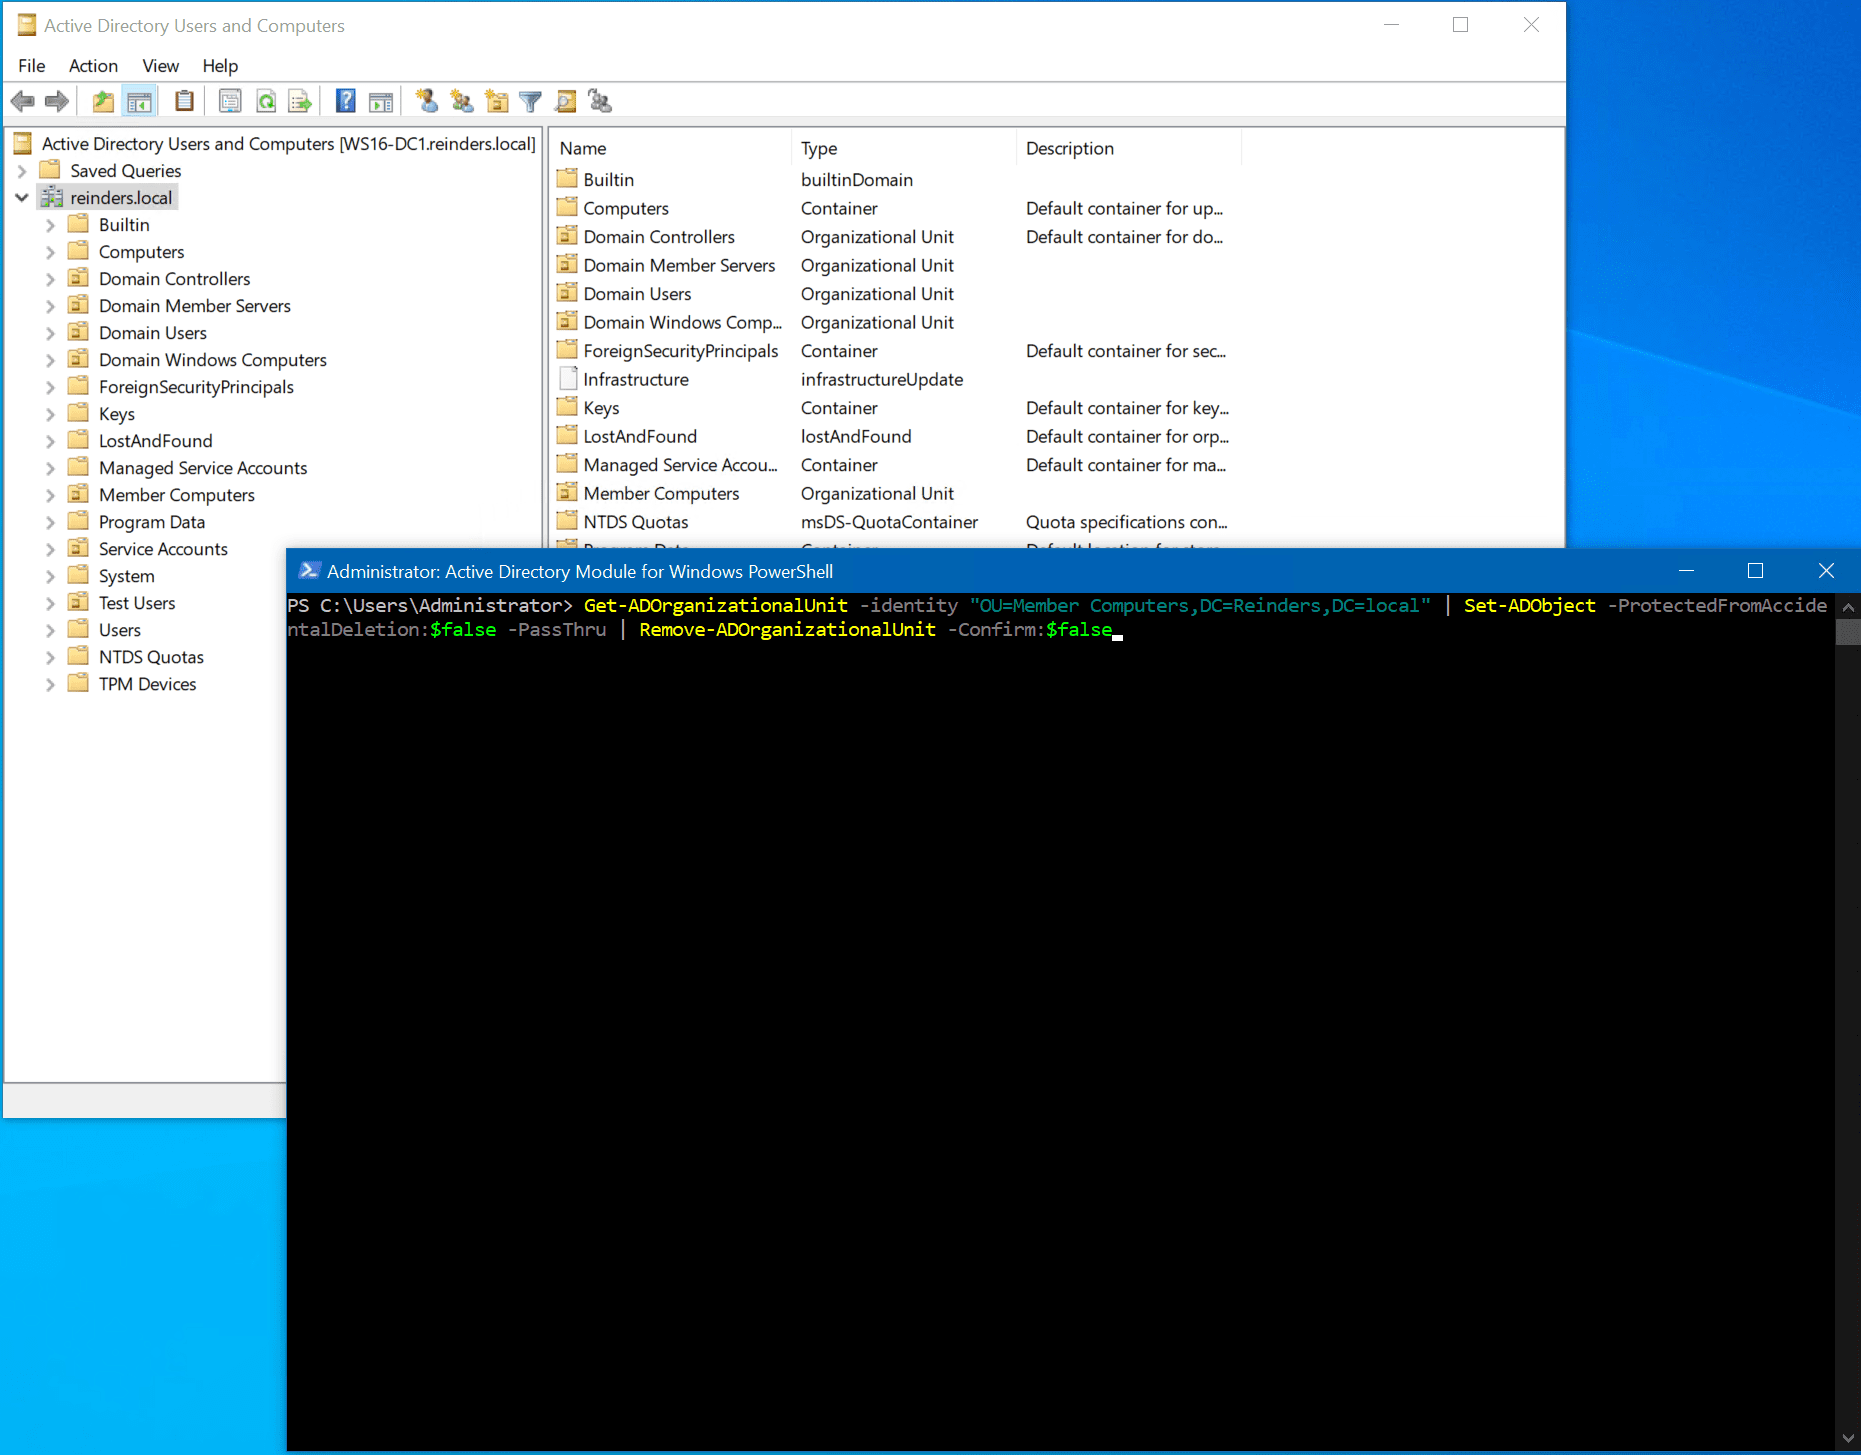 We use 3 PowerShell commands to delete the 'Member Computers' OU.